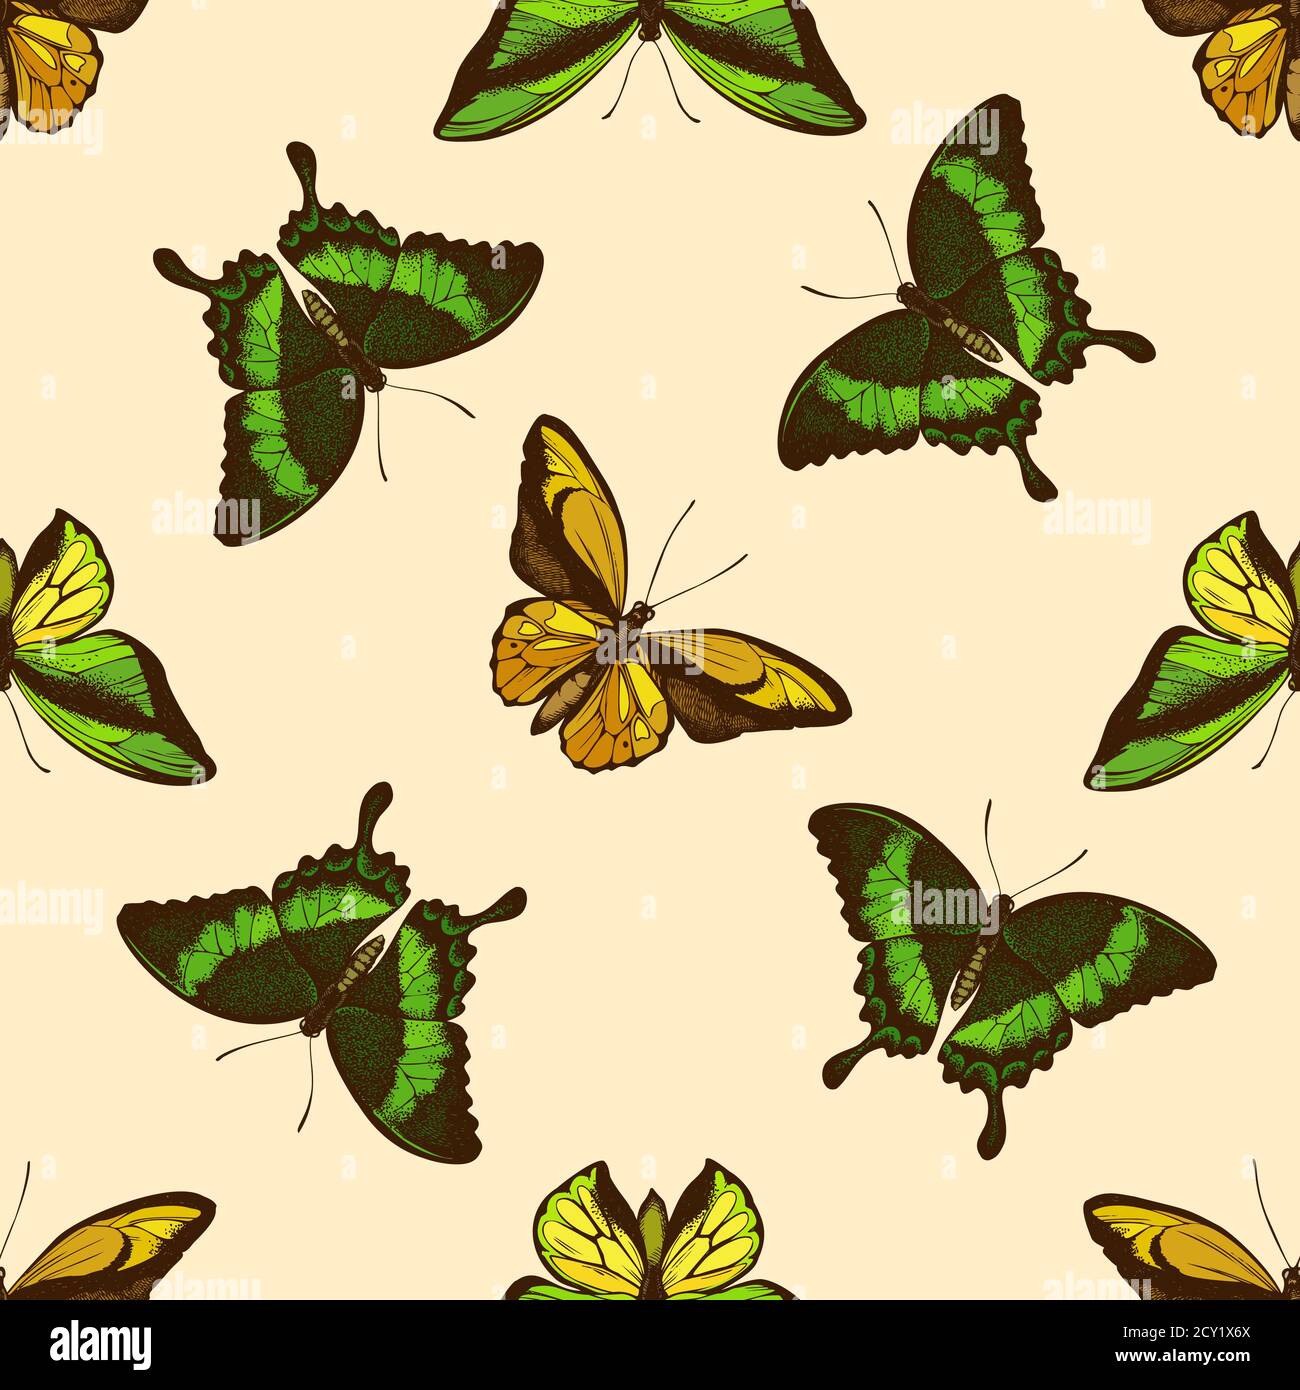 Seamless pattern with hand drawn colored wallace s golden birdwing, emerald swallowtail, swallowtail butterfly Stock Vector